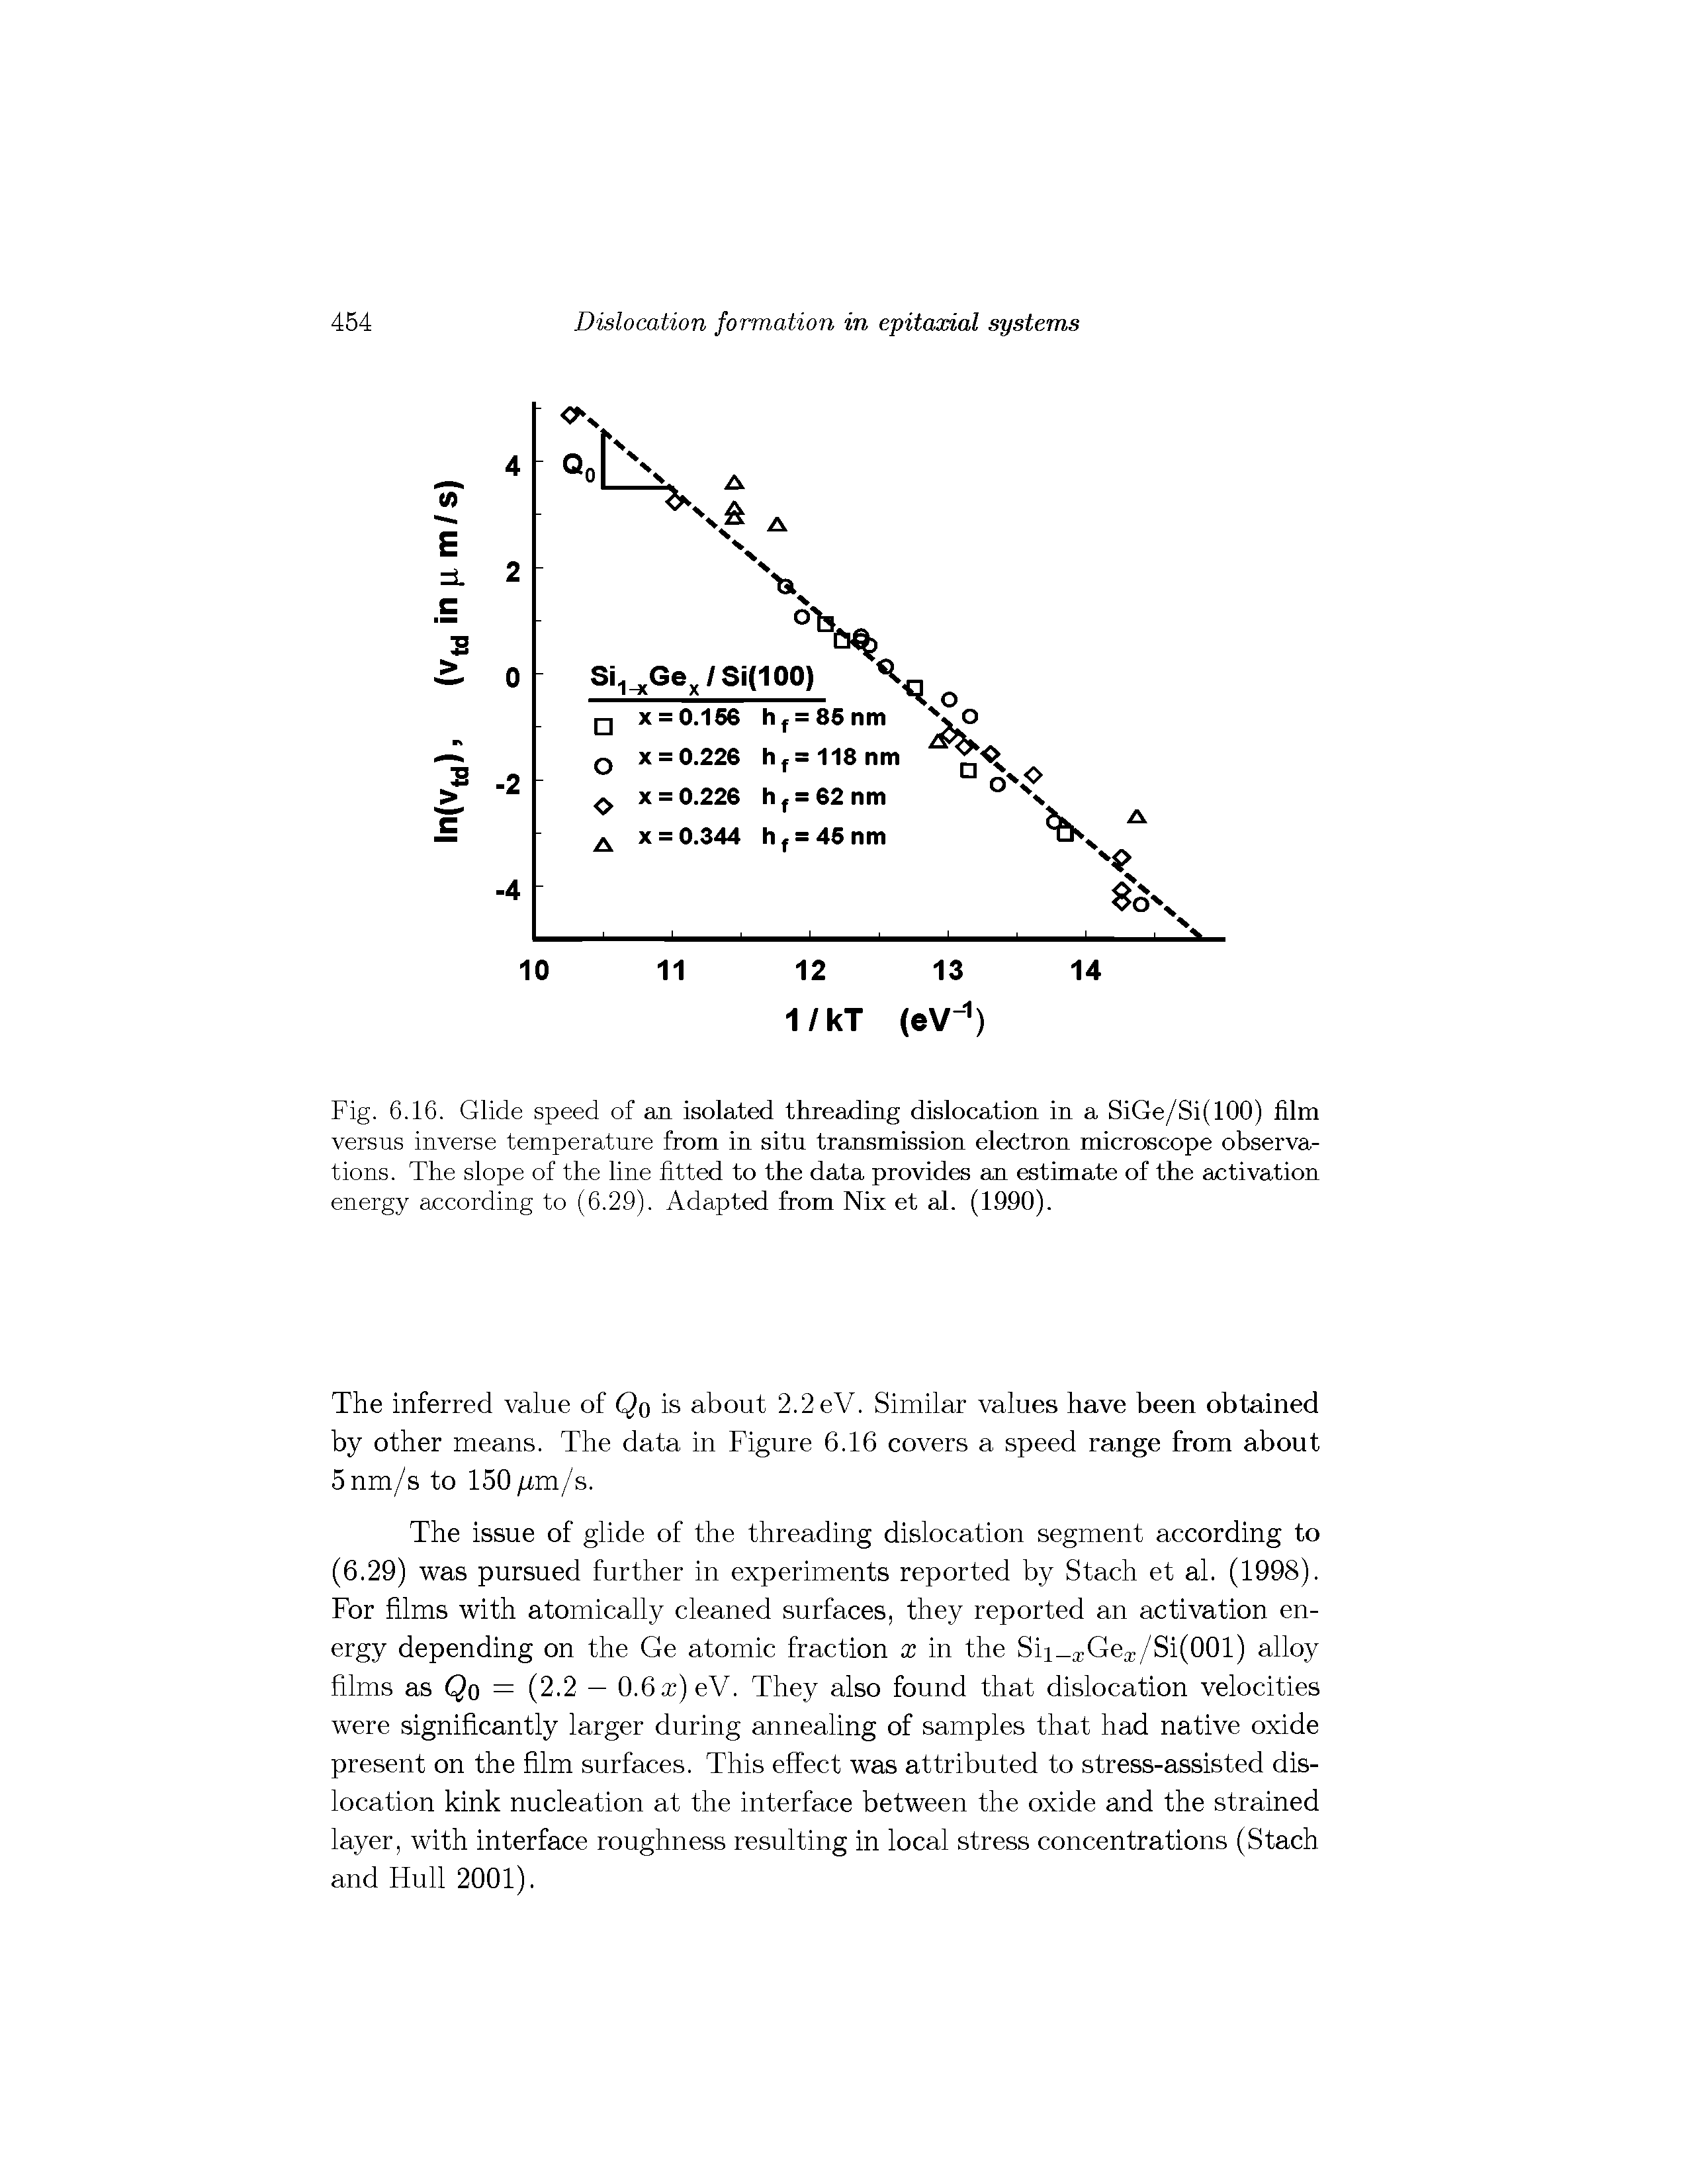 Fig. 6.16. Glide speed of an isolated threading dislocation in a SiGe/Si(100) film versus inverse temperature from in situ transmission electron microscope observations. The slope of the line fitted to the data provides an estimate of the activation energy according to (6.29). Adapted from Nix et al. (1990).